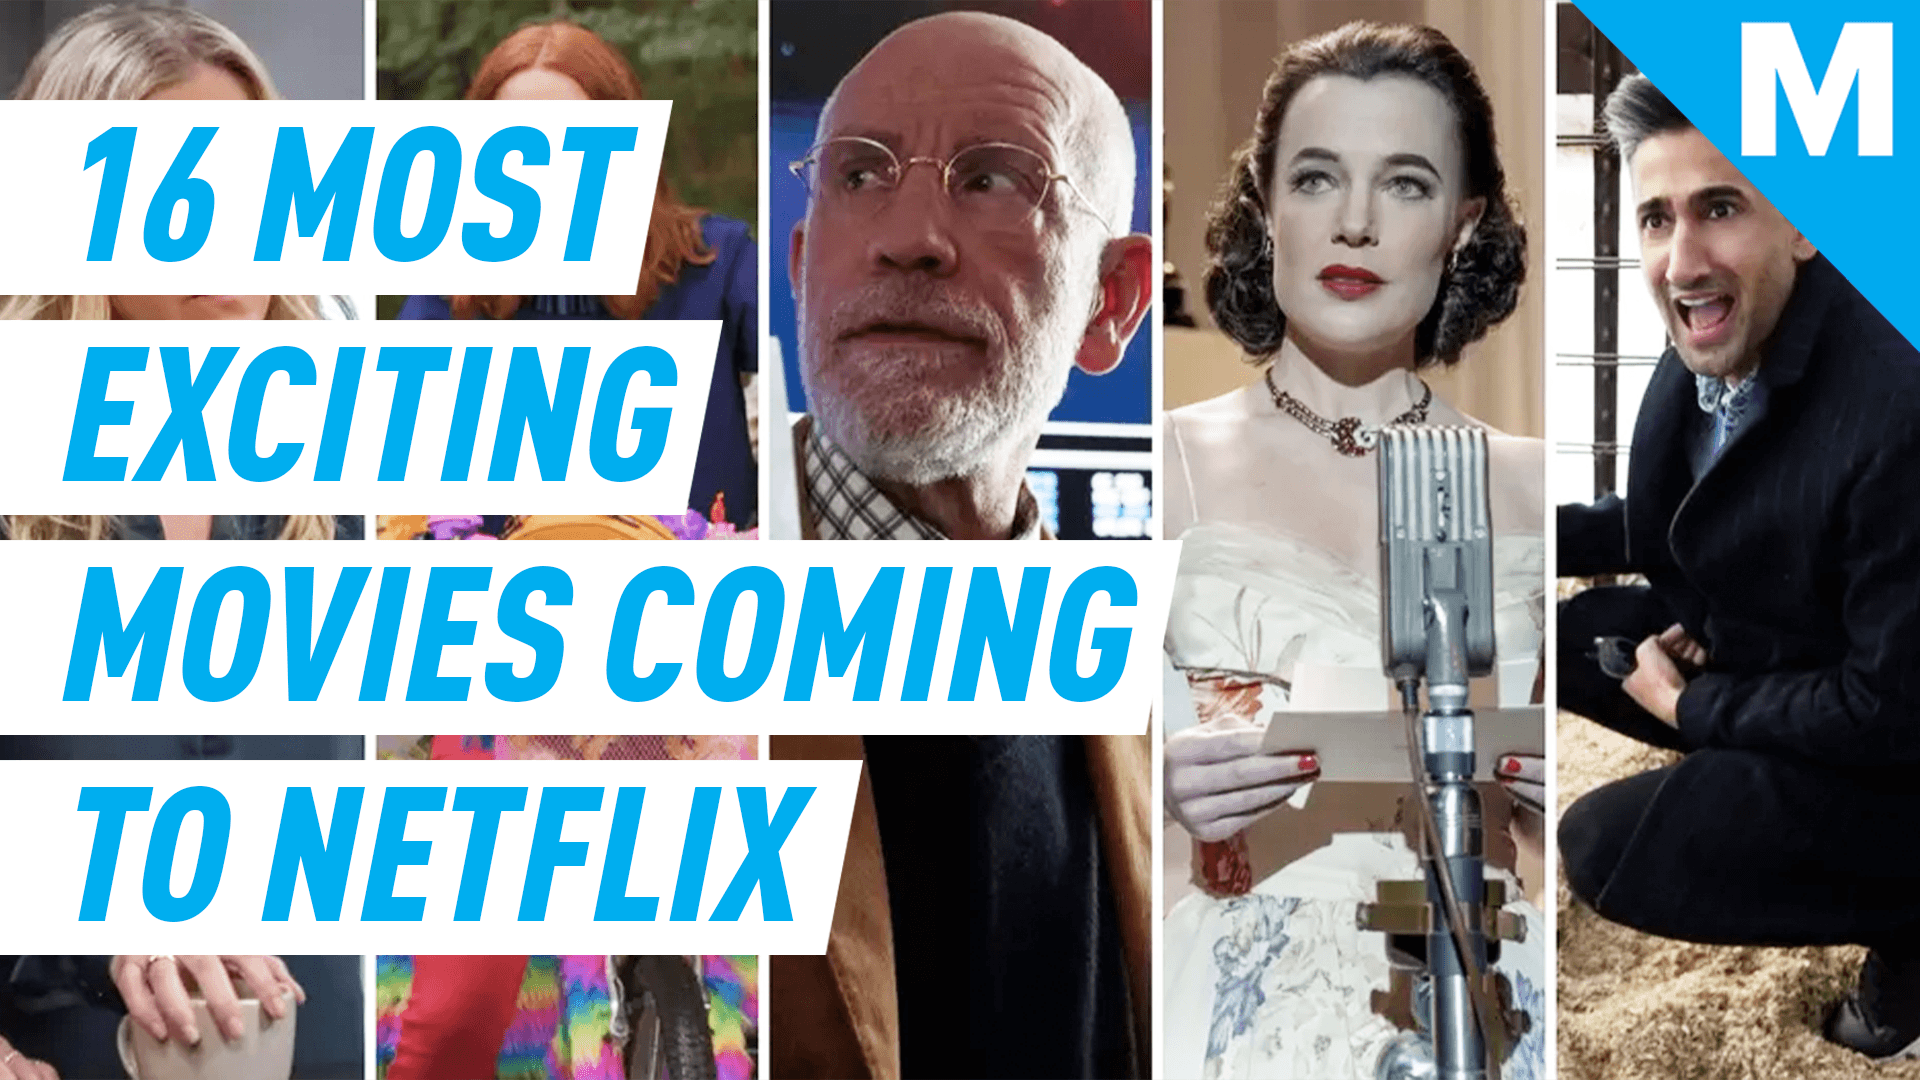 16 mustsee movies and shows coming to Netflix this summer